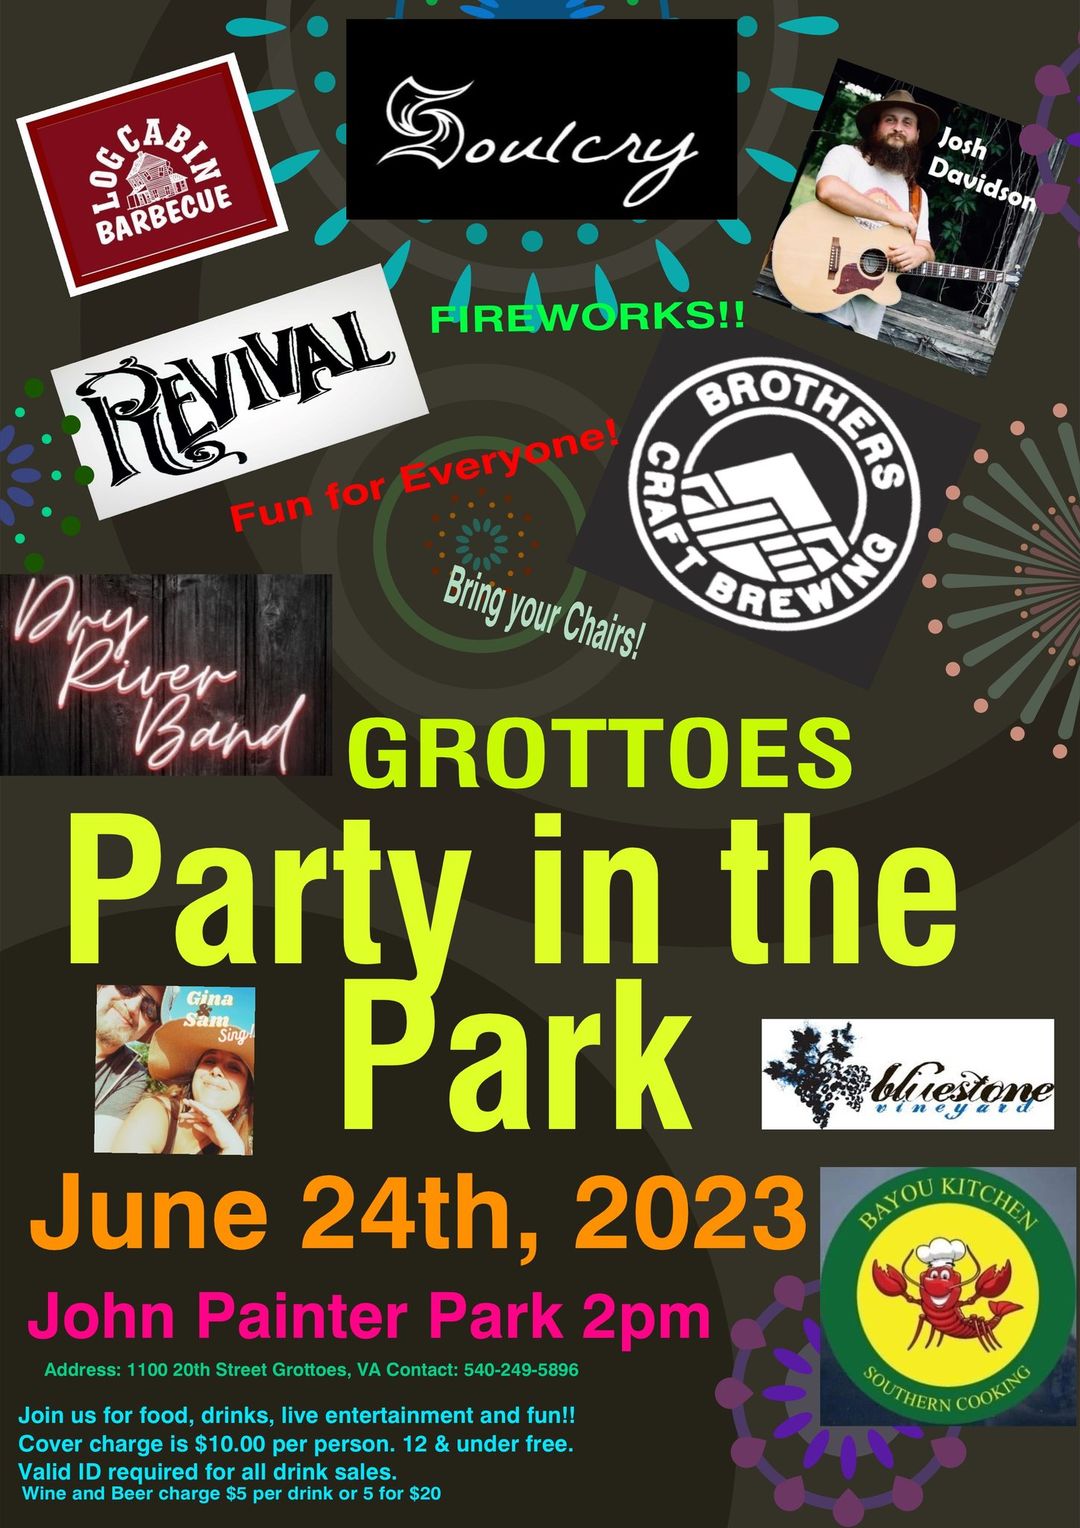 Grottoes Party In The Park